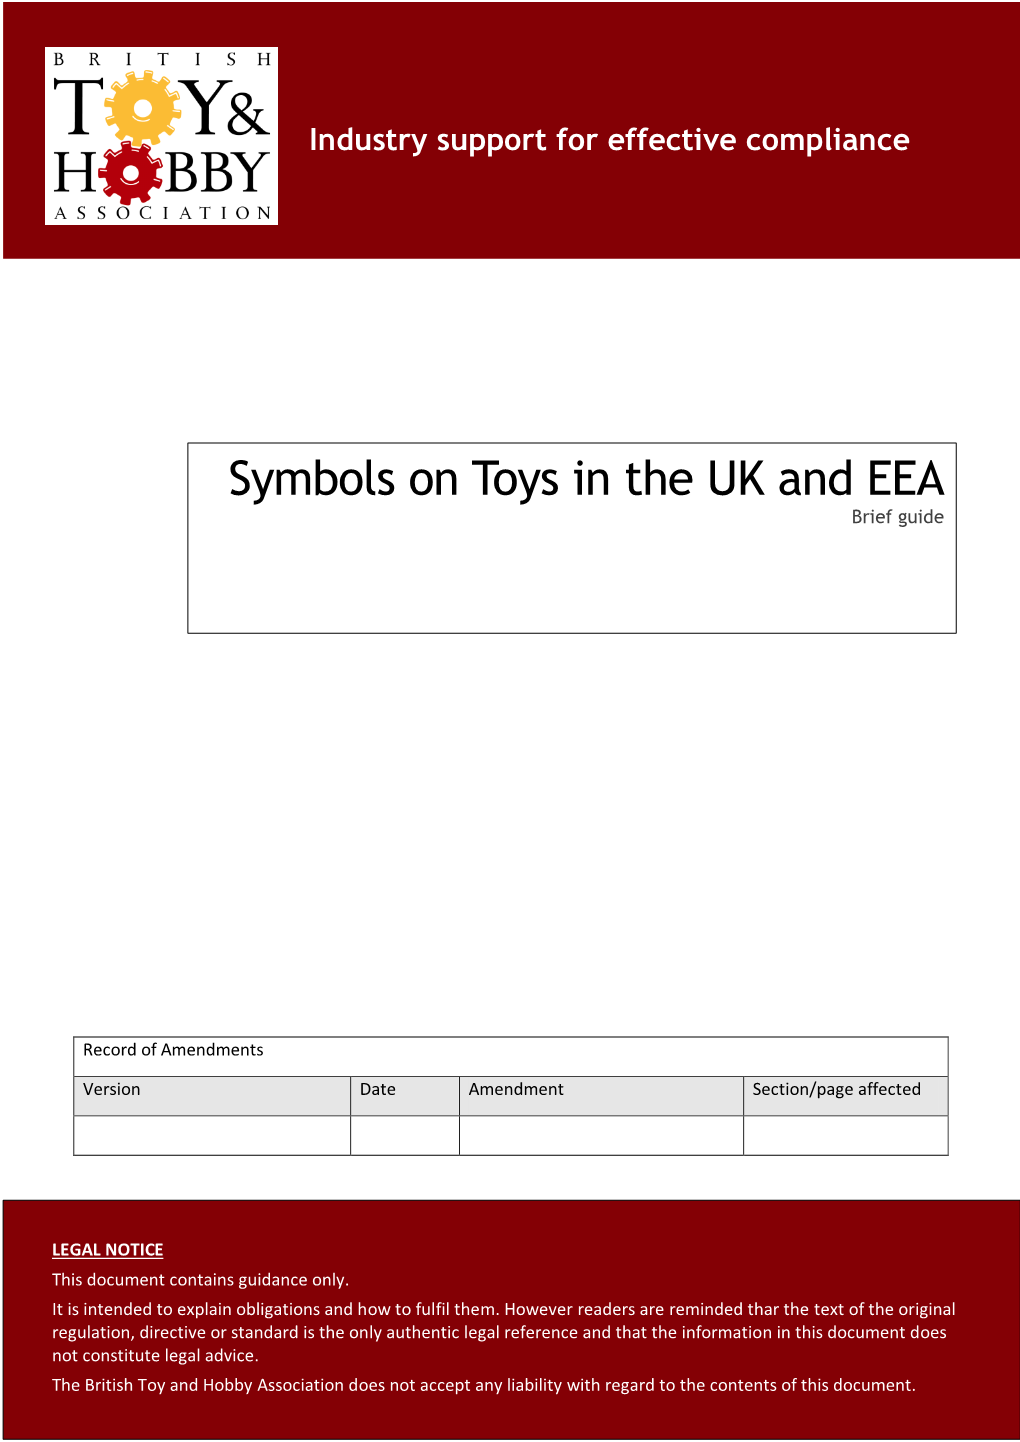 Symbols on Toys in the UK and EEA Brief Guide